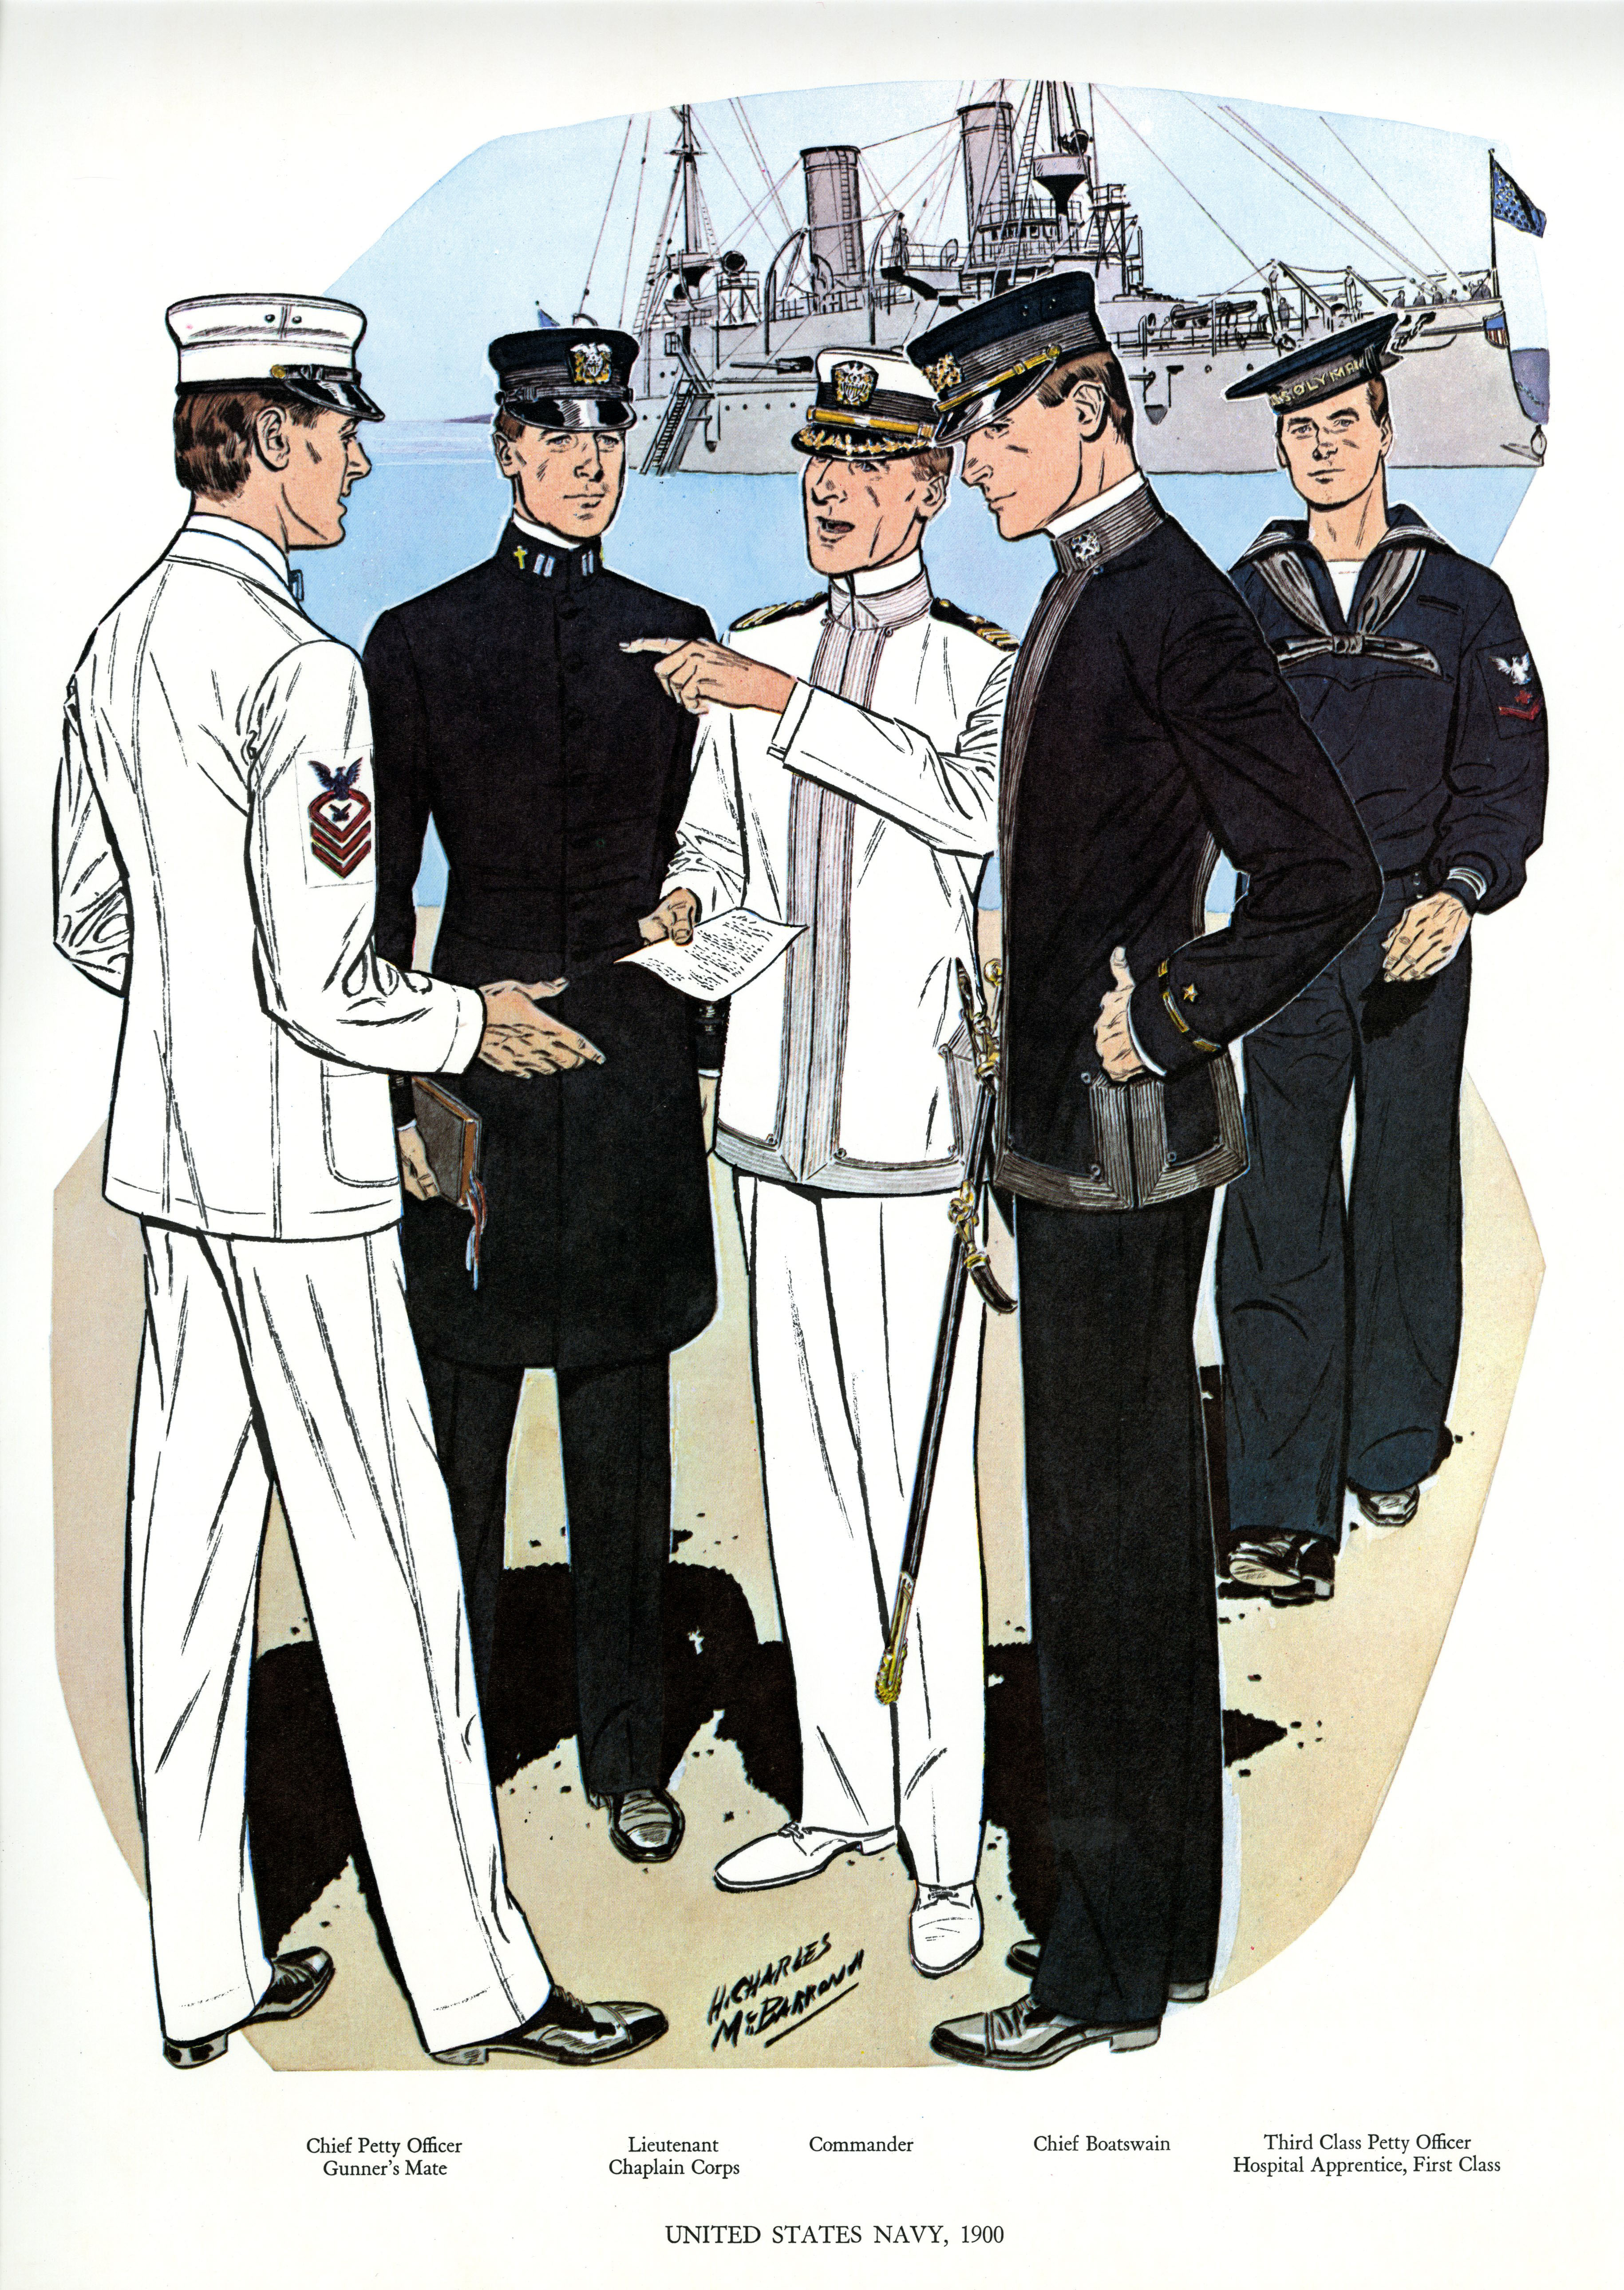 navy enlisted dress uniforms